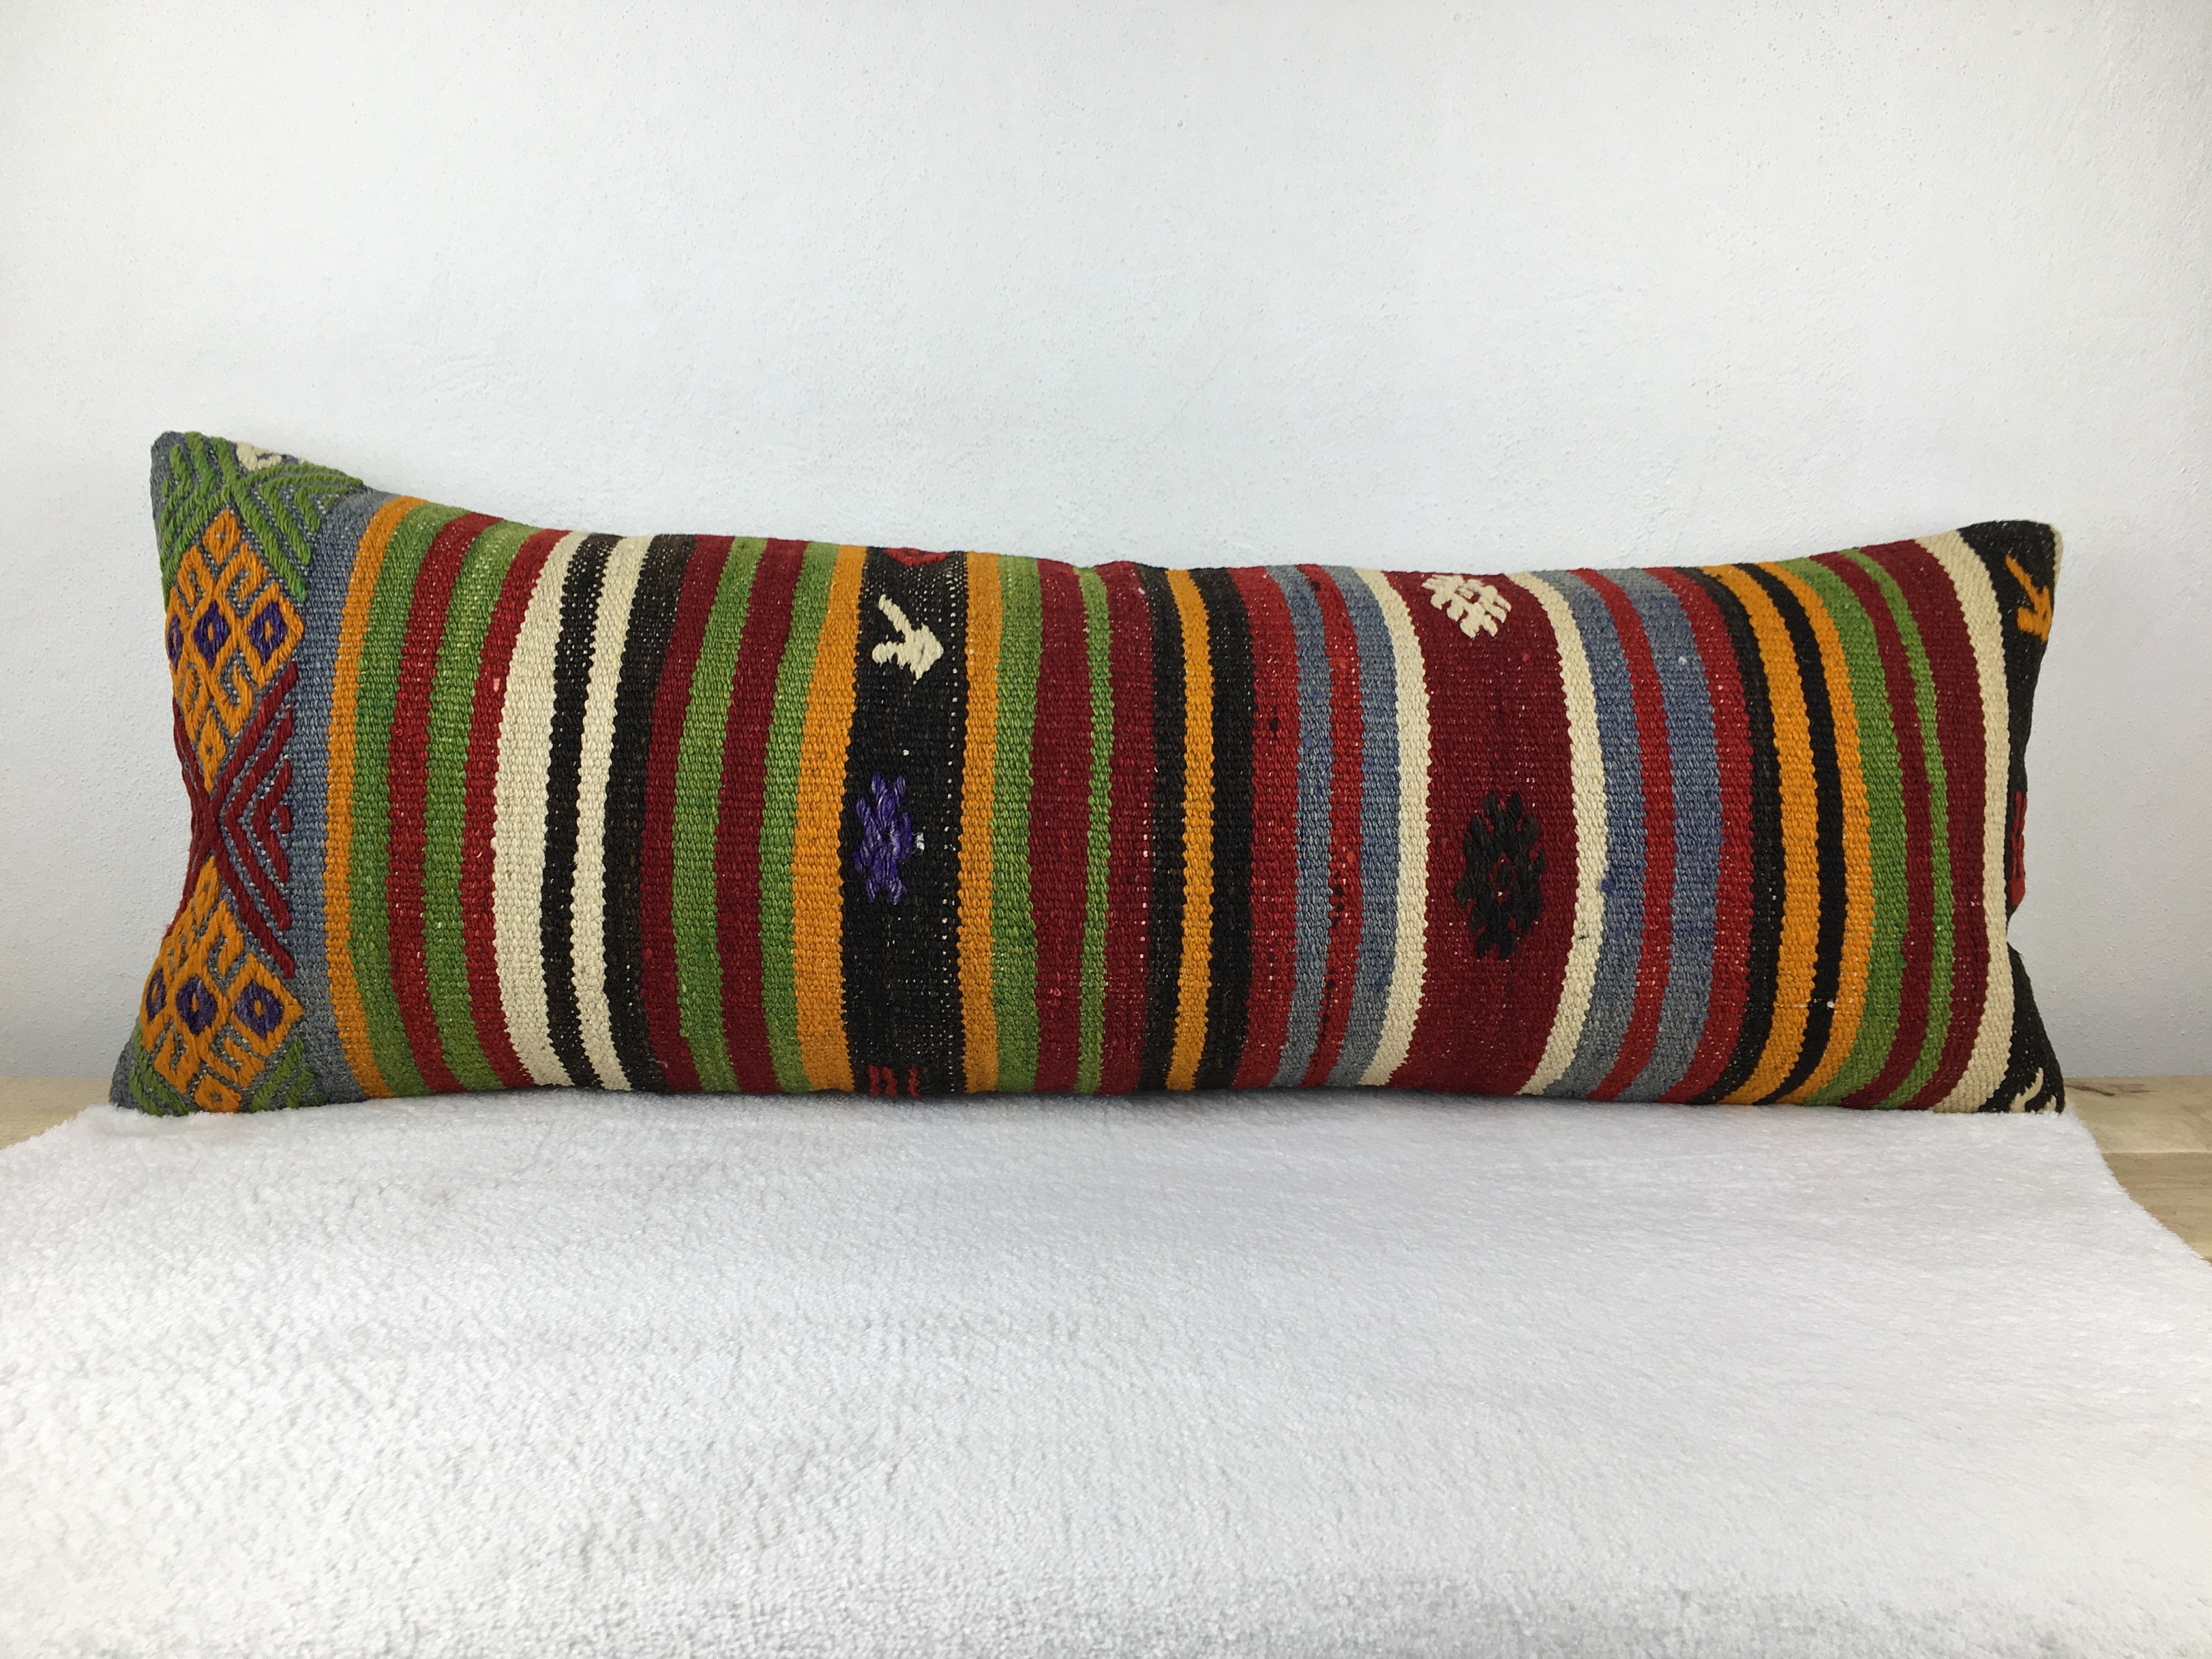 12x36 Pillow,organic Pillow,bed Pillow,wool,french Cottage Decor,rustic  Throw Pillow,cottage Chic Pillow,farmhouse Pillow,kilim Pillows 